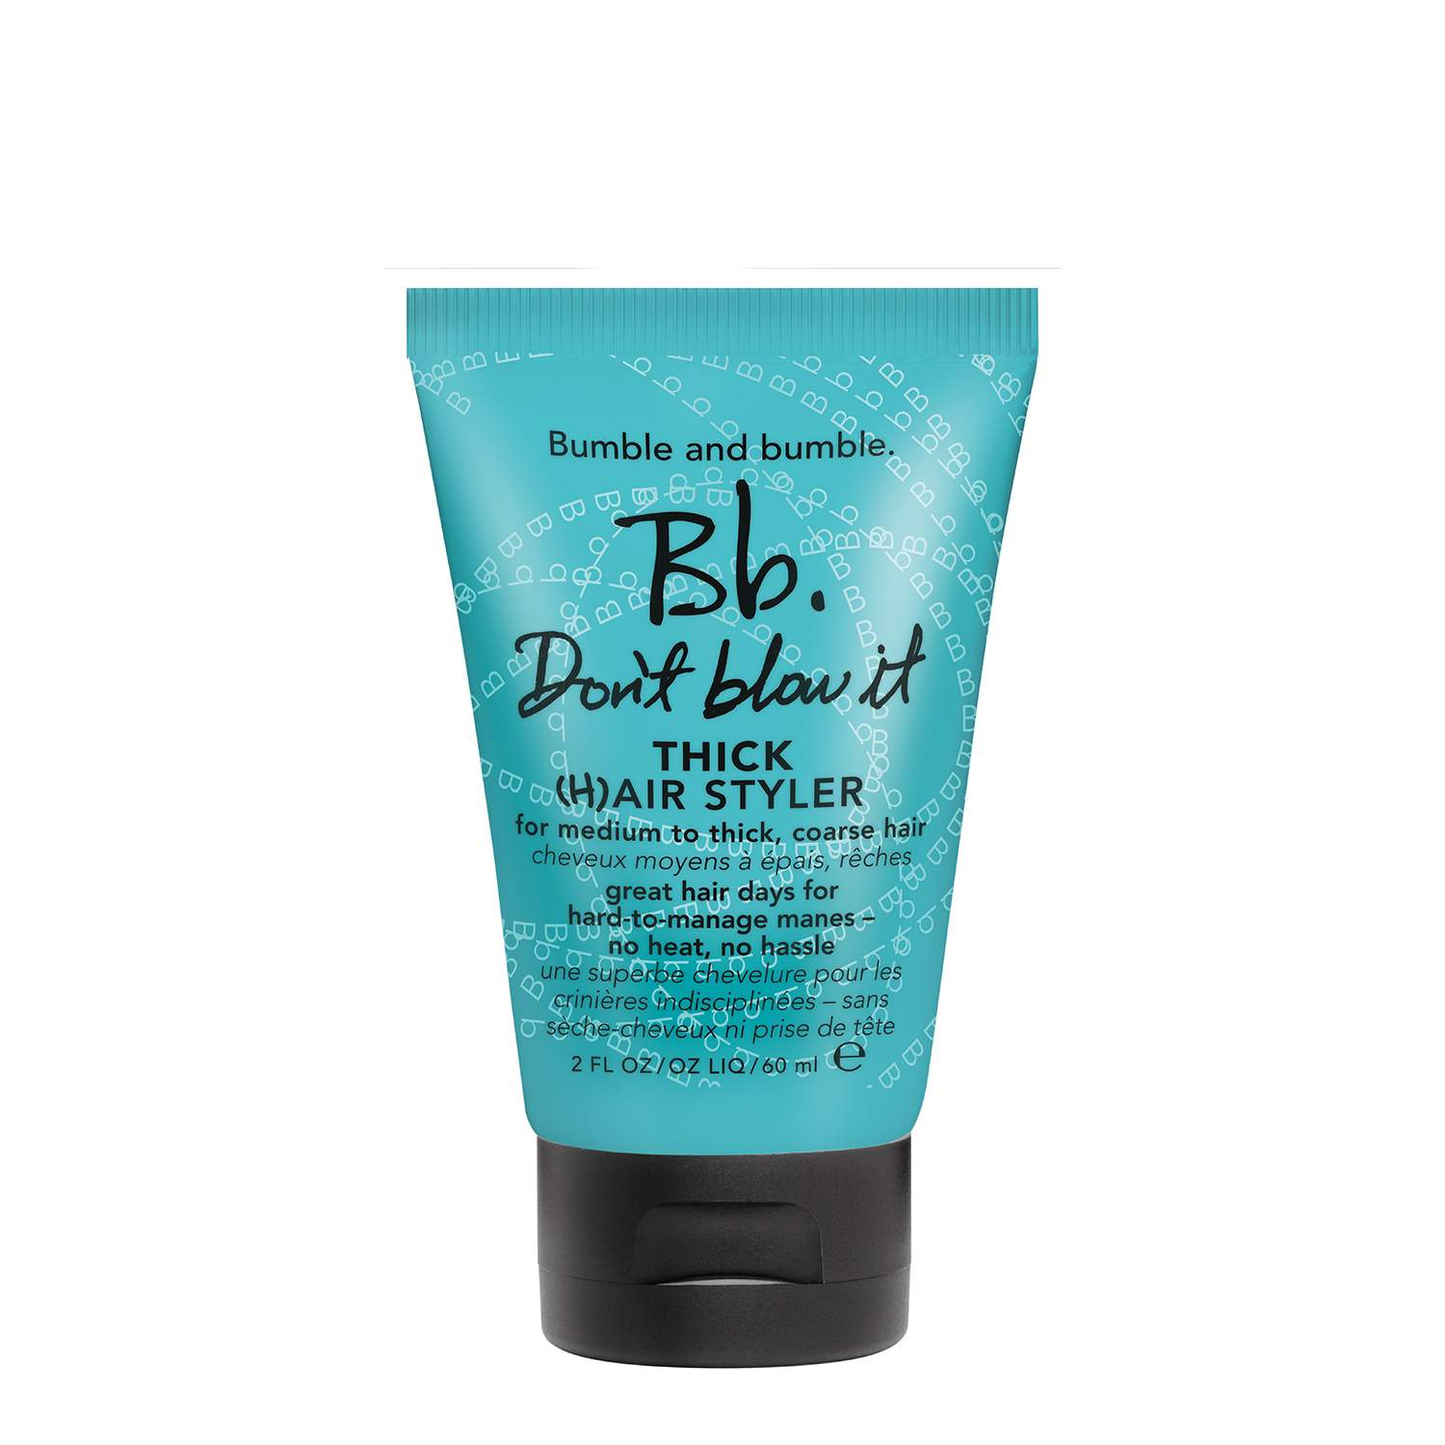 Bumble and bumble. Don't Blow It Thick - Travel Size